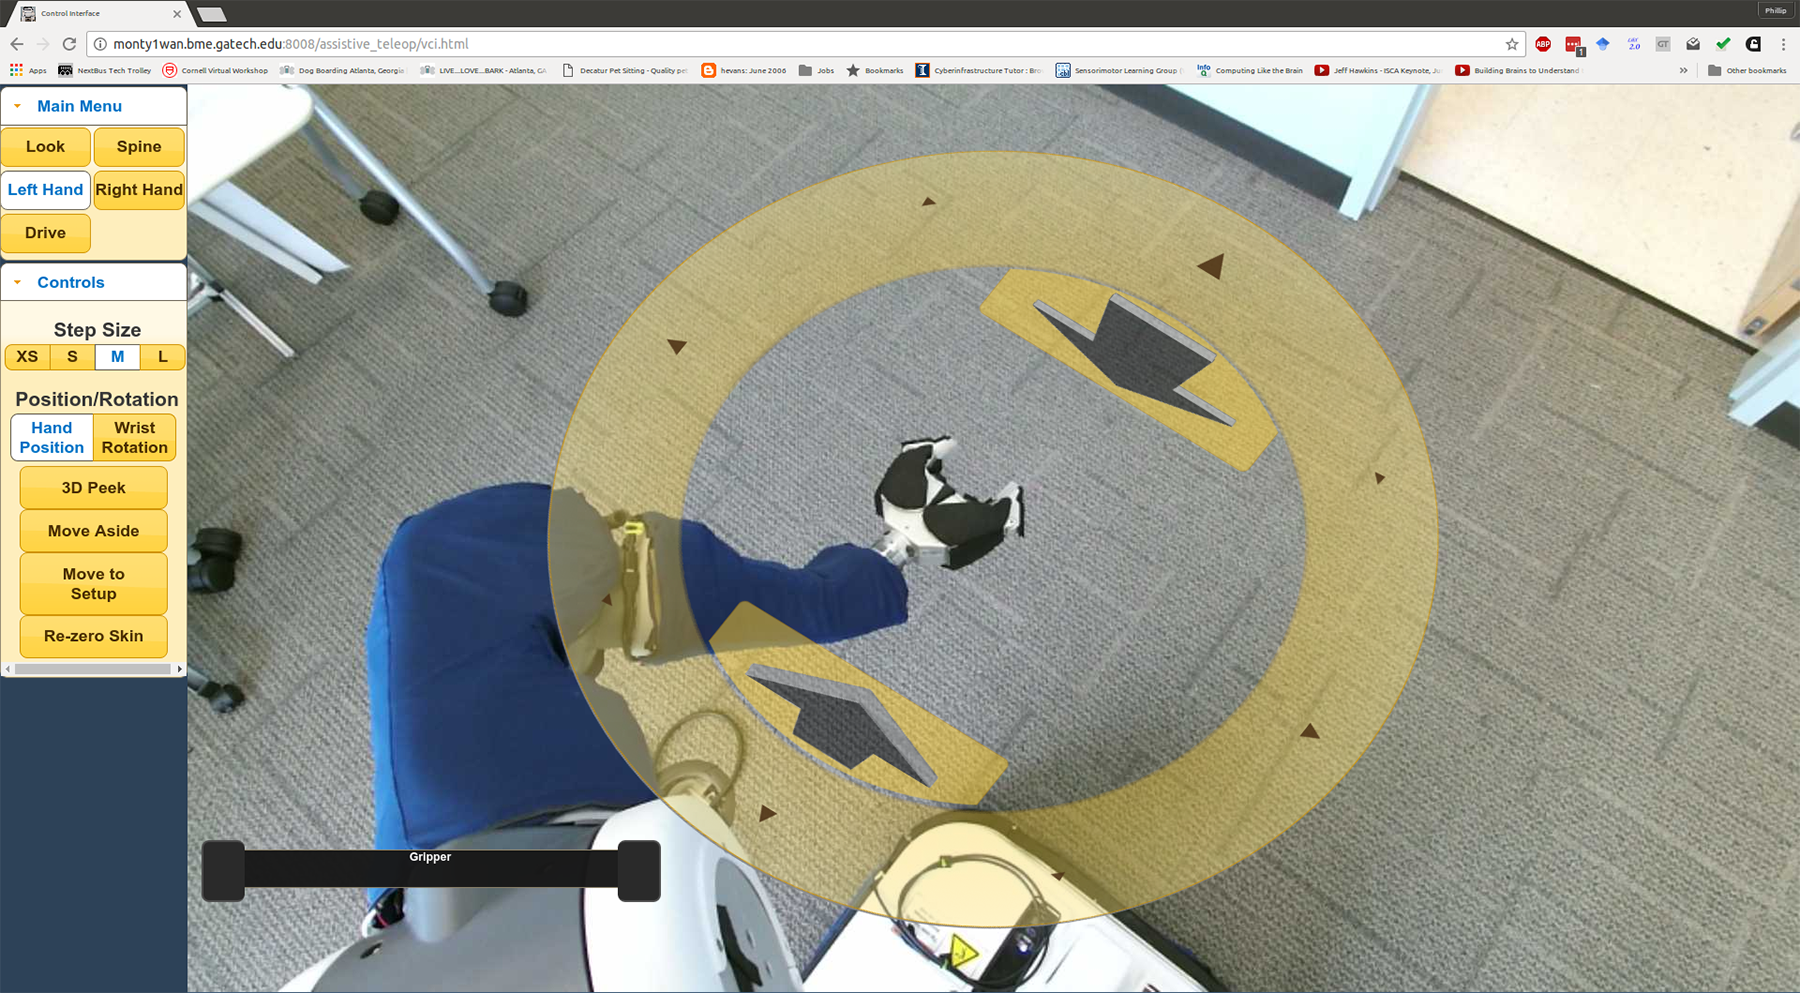 Image shows the view through the PR2’s cameras showing the environment around the robot. Clicking the yellow disc allows users the control the arm. (Credit: Phillip Grice, Georgia Tech)